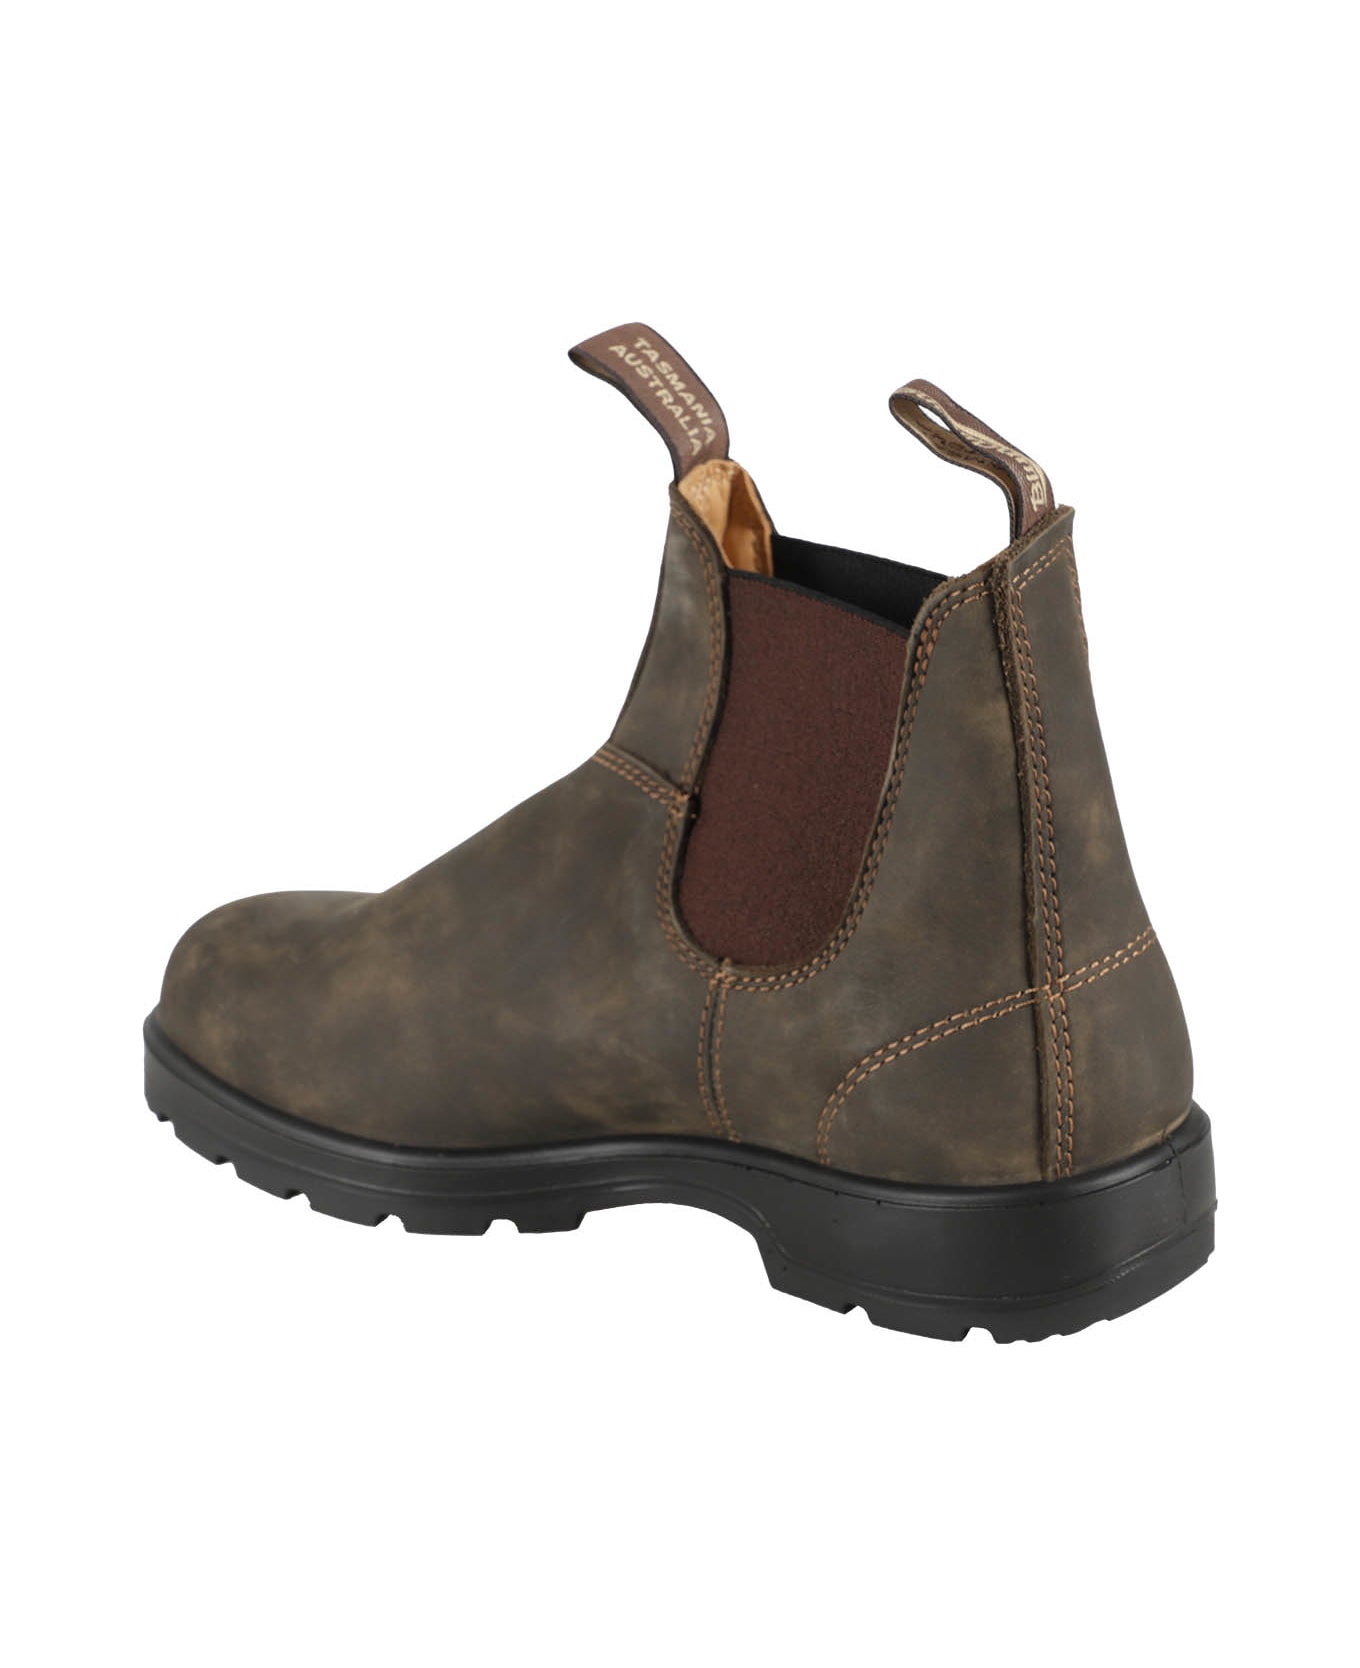 Blundstone Rustic Leather - Rustic Brown Brown ブーツ